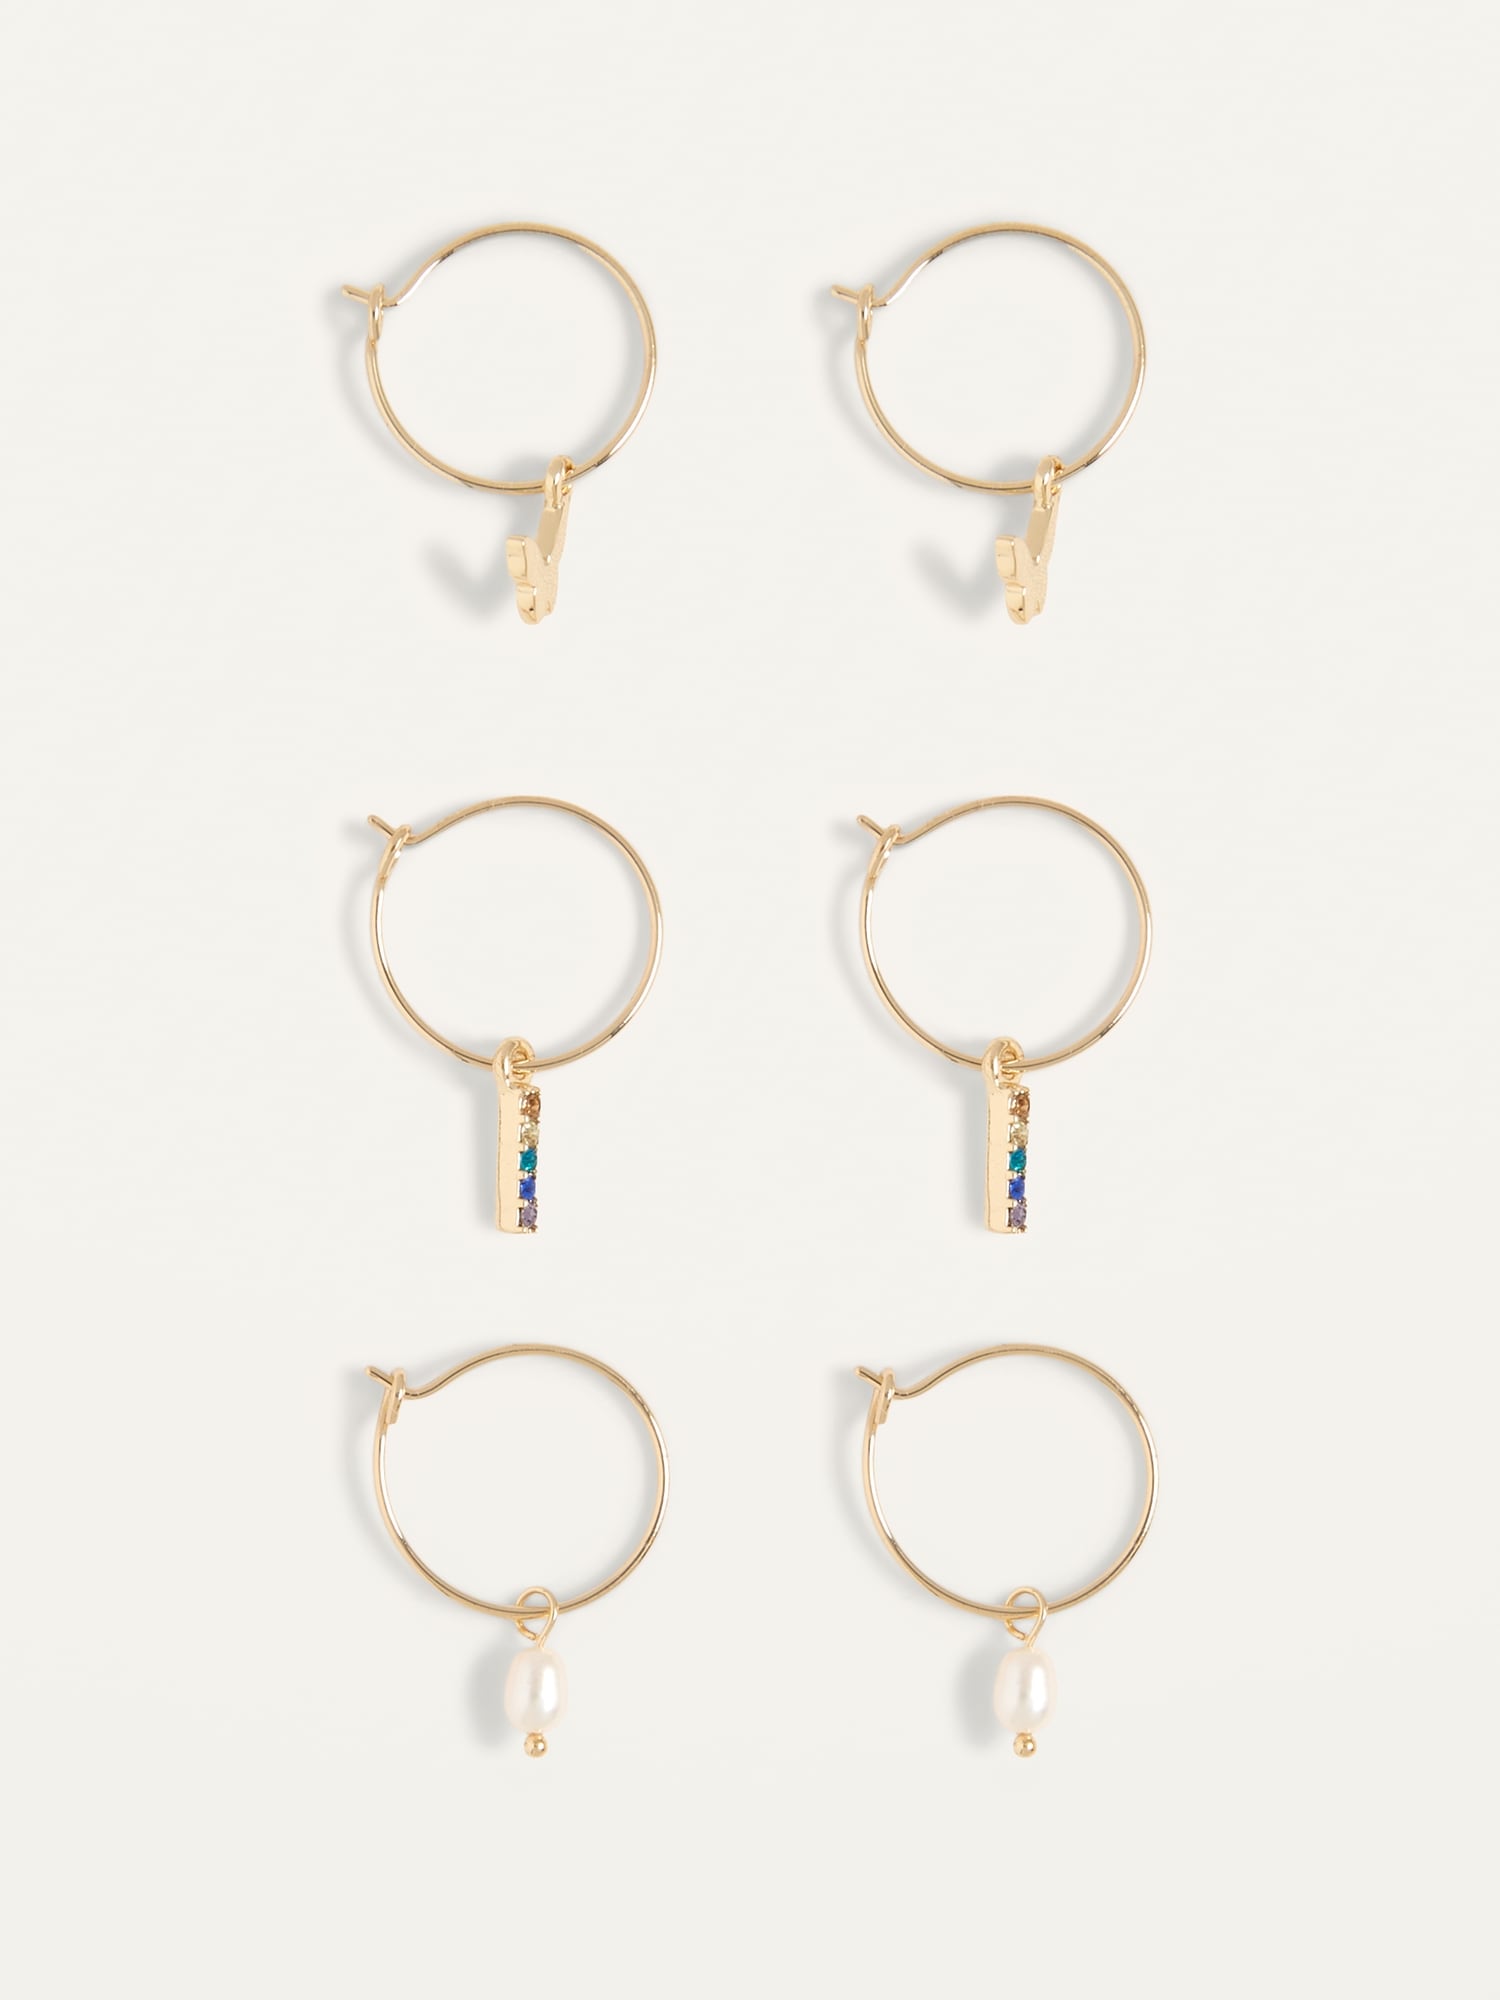 Real Gold-Plated Hoop Earrings 3-Pack for Women